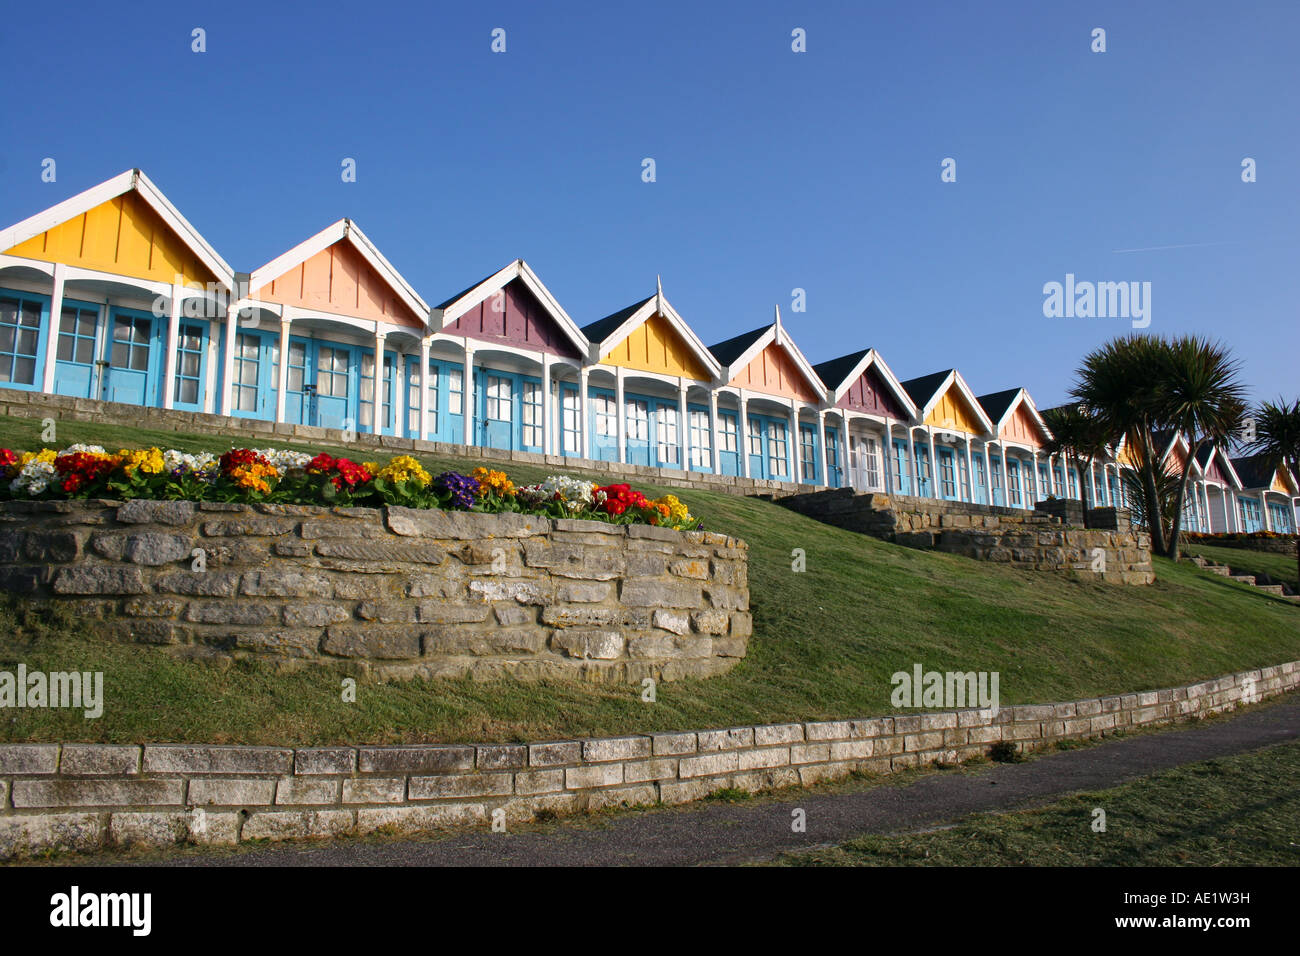 The beach huts in Greenhill Gardens in Weymouth, Dorset Stock Photo